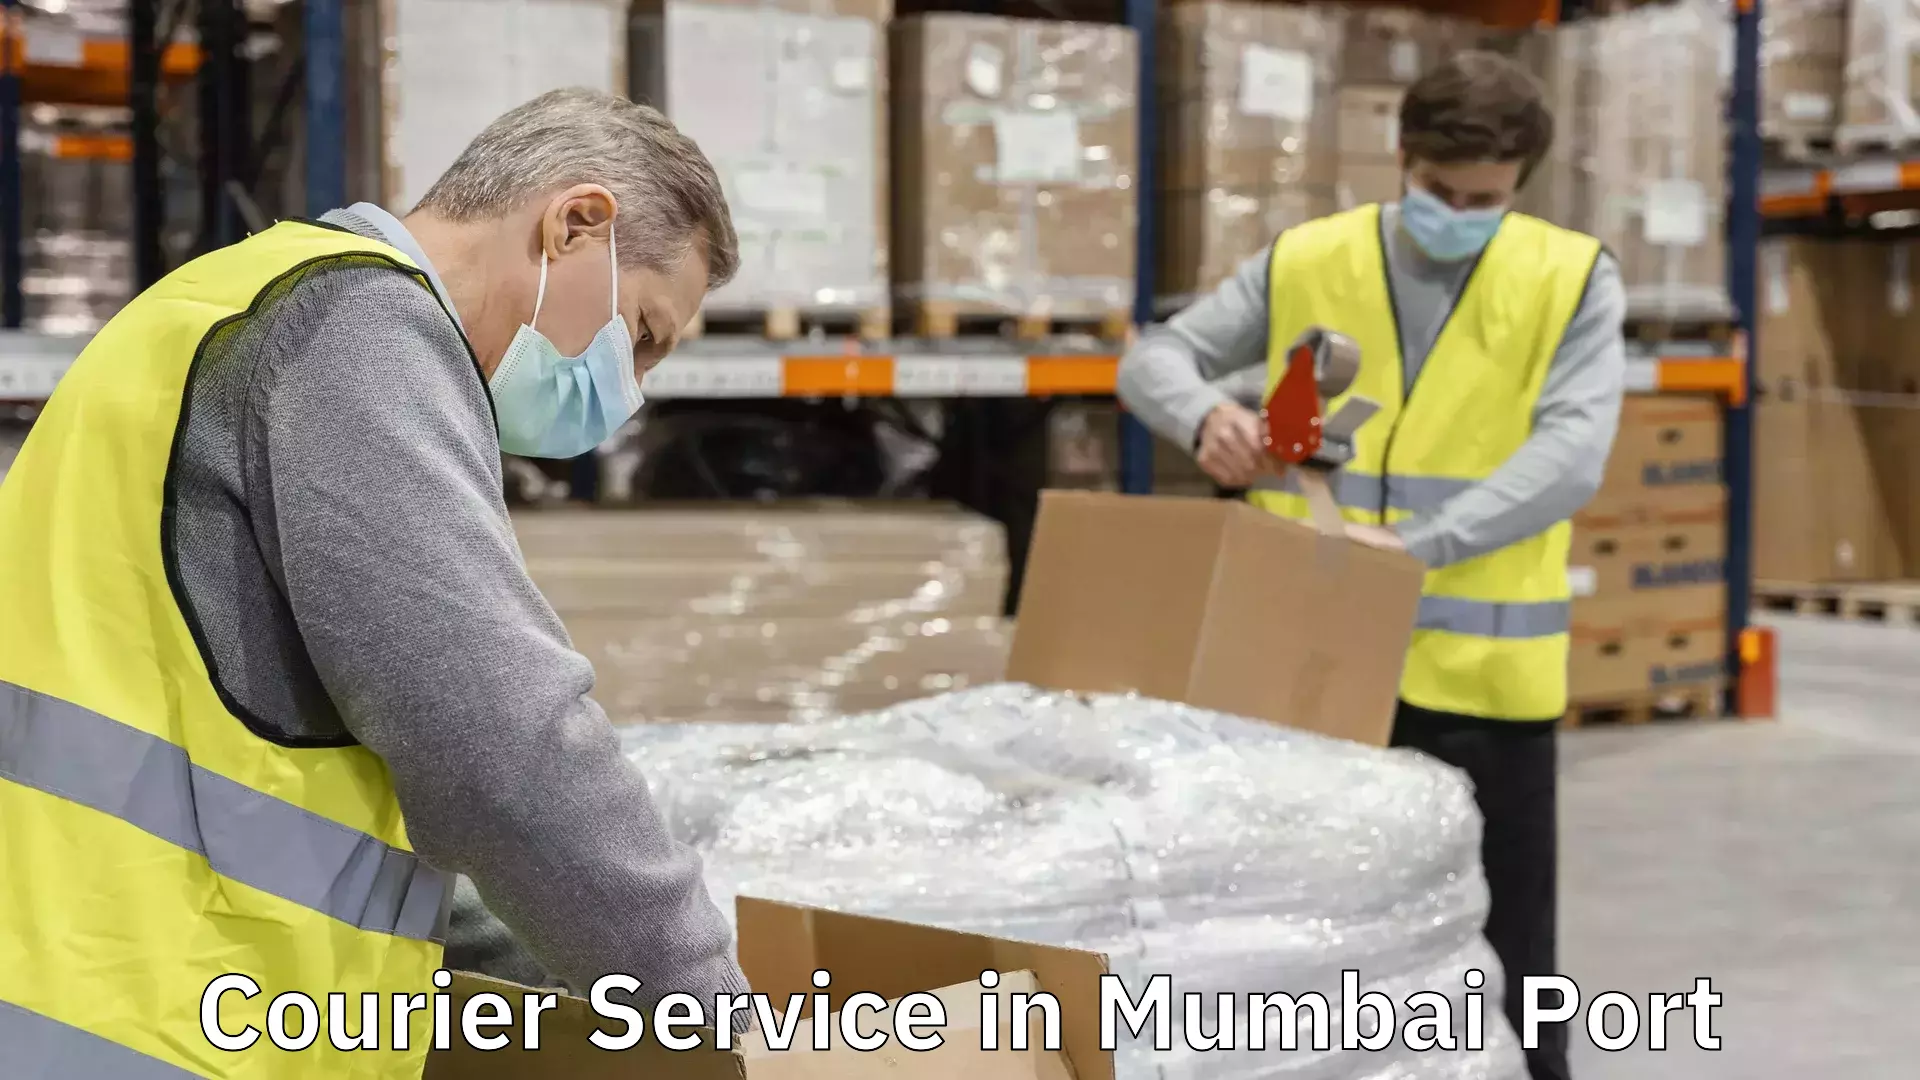 Professional courier services in Mumbai Port